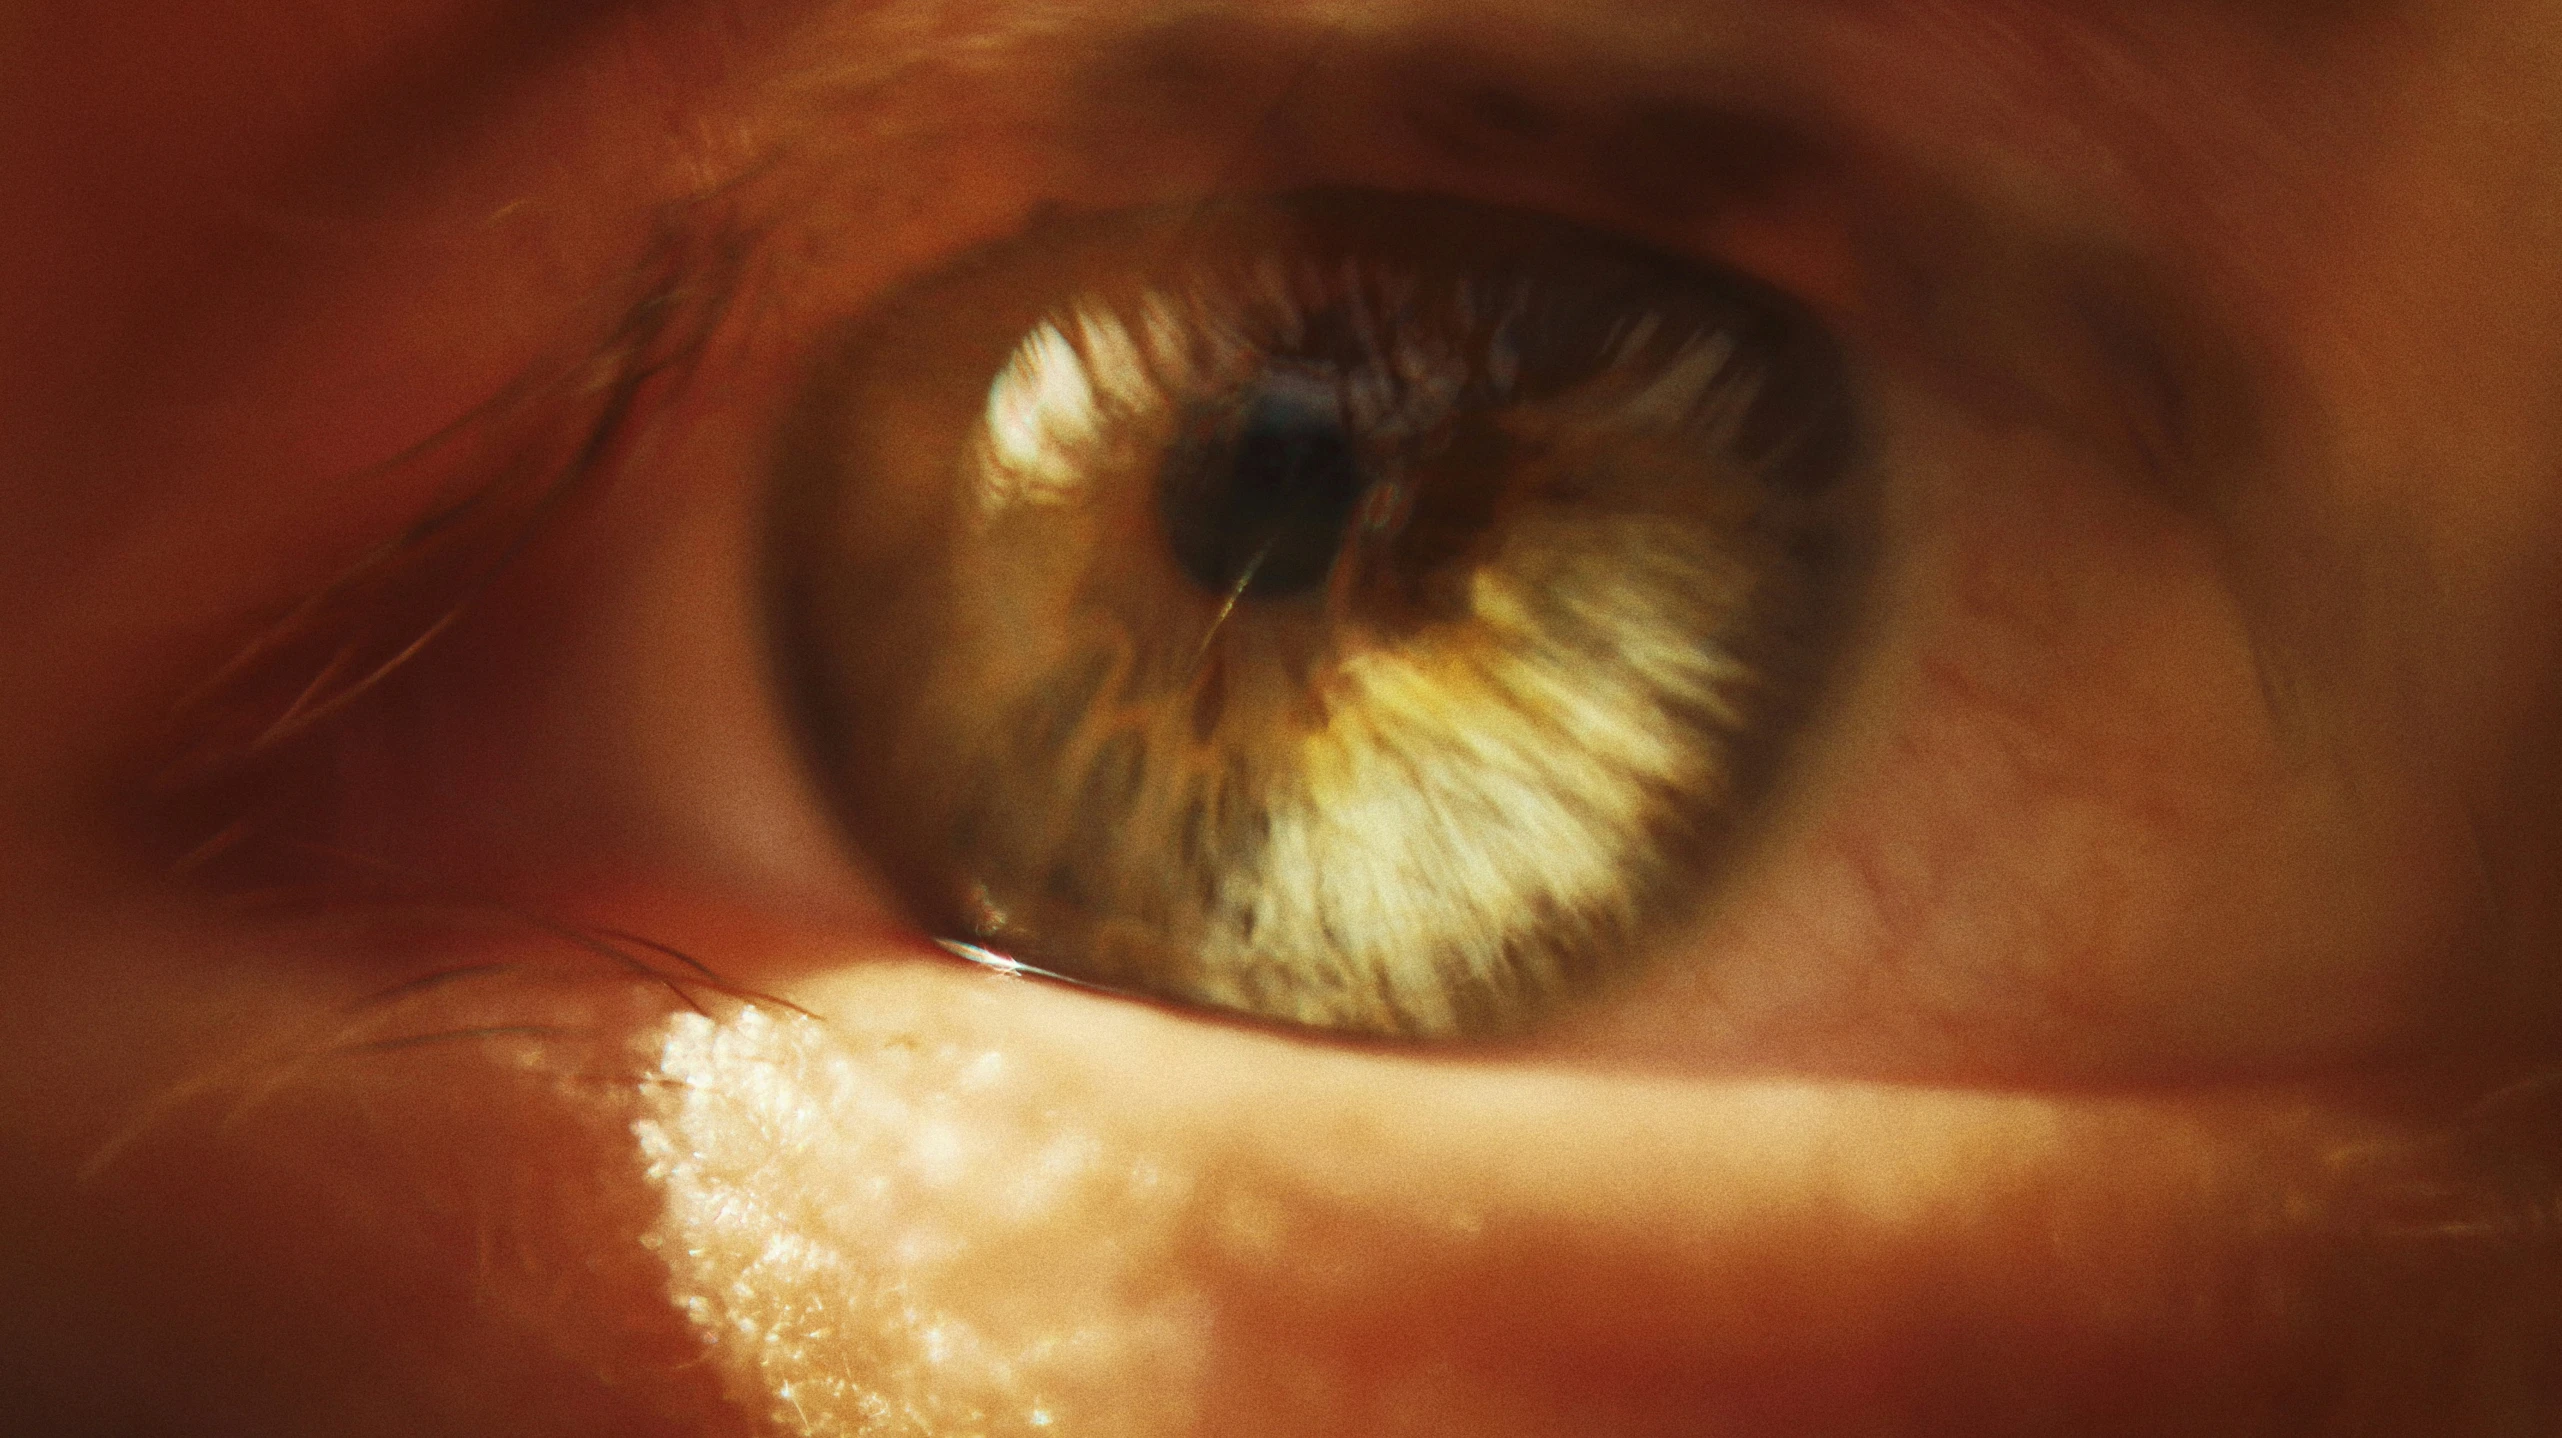 an eye is pictured with an orange and yellow background